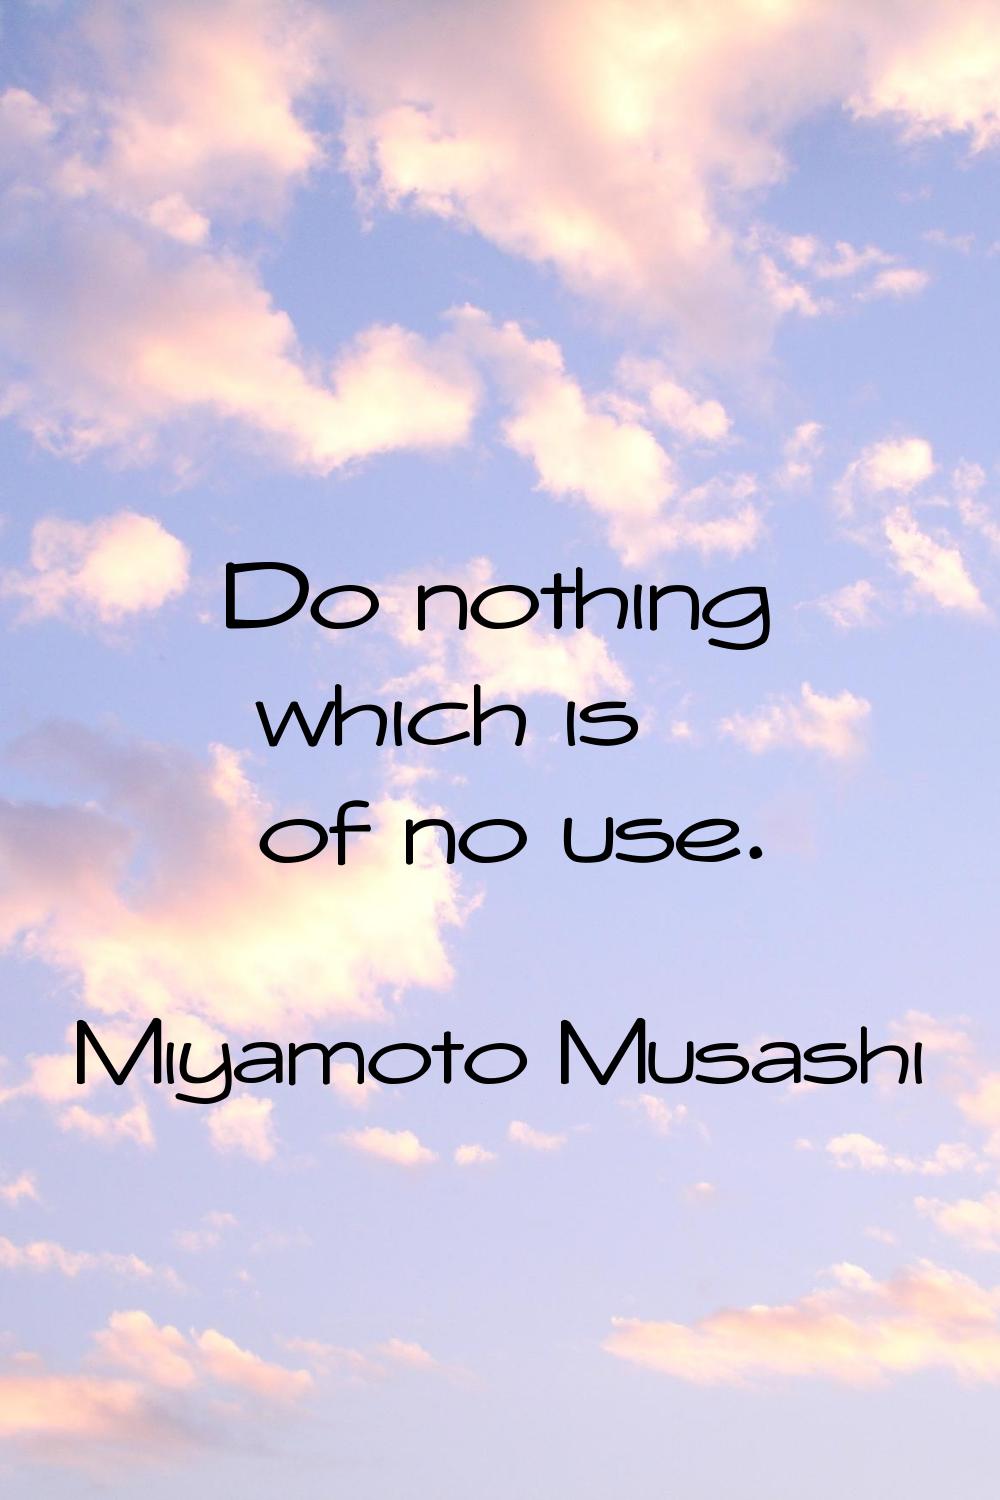 Do nothing which is of no use.